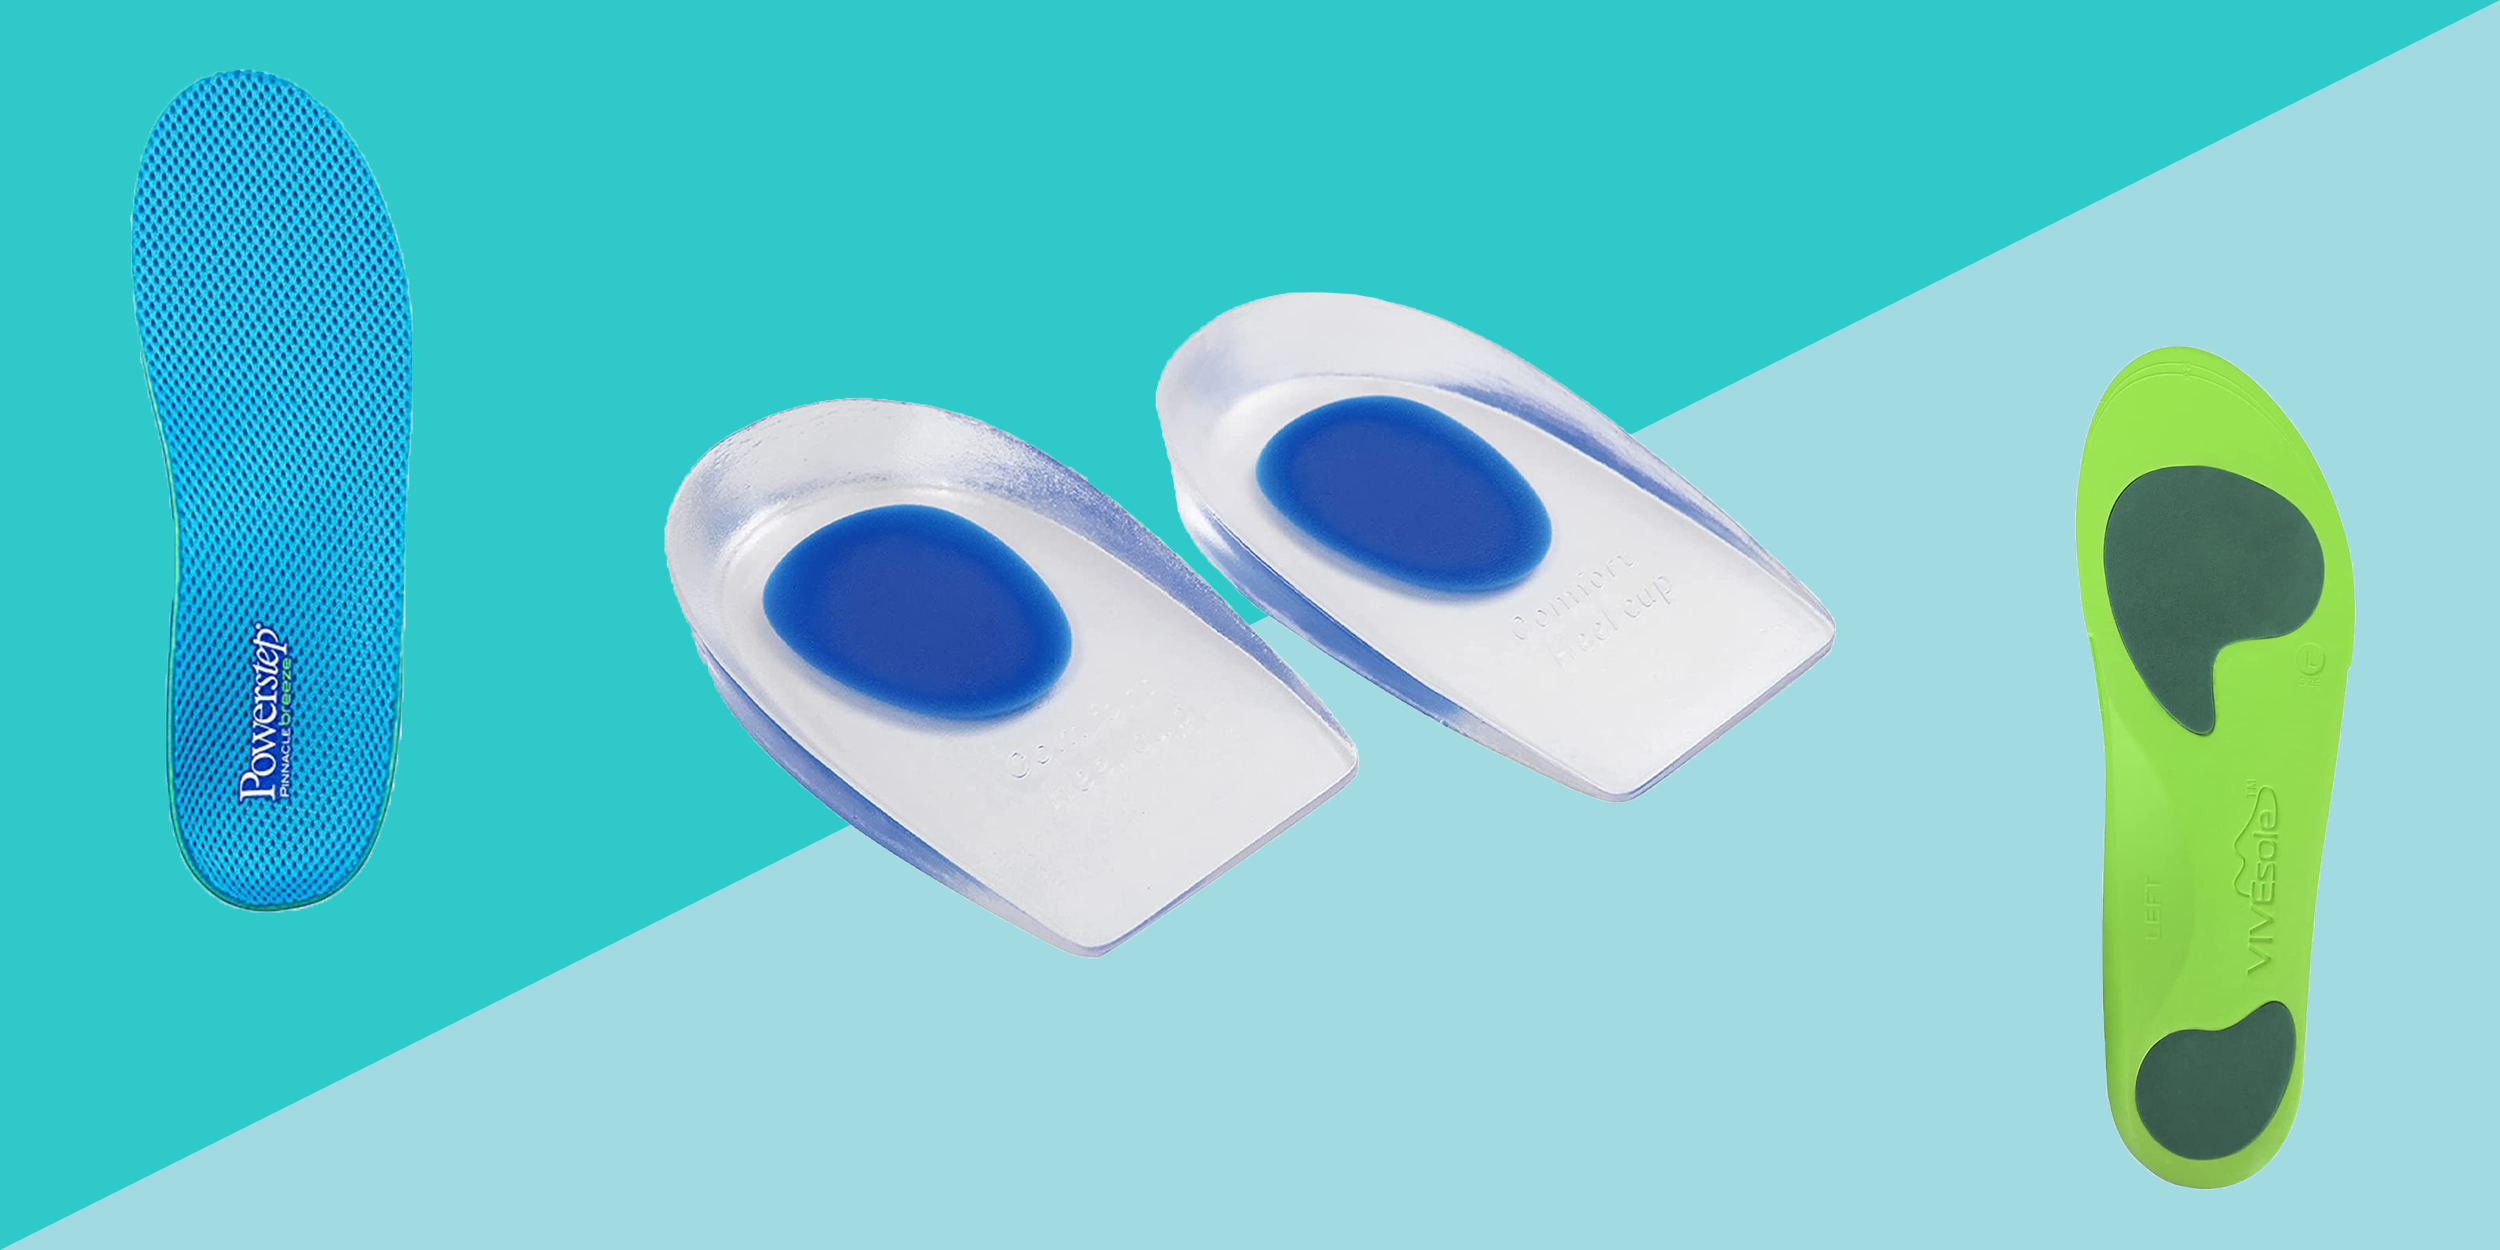 Plantar Fasciitis Supports Orthotic Insole Orthopedic Arch Support Foot Insoles For Women Or Men Feet Insoles For Plantar Fasciitis Fachilles Tendonitis Heel Support For Shoes 